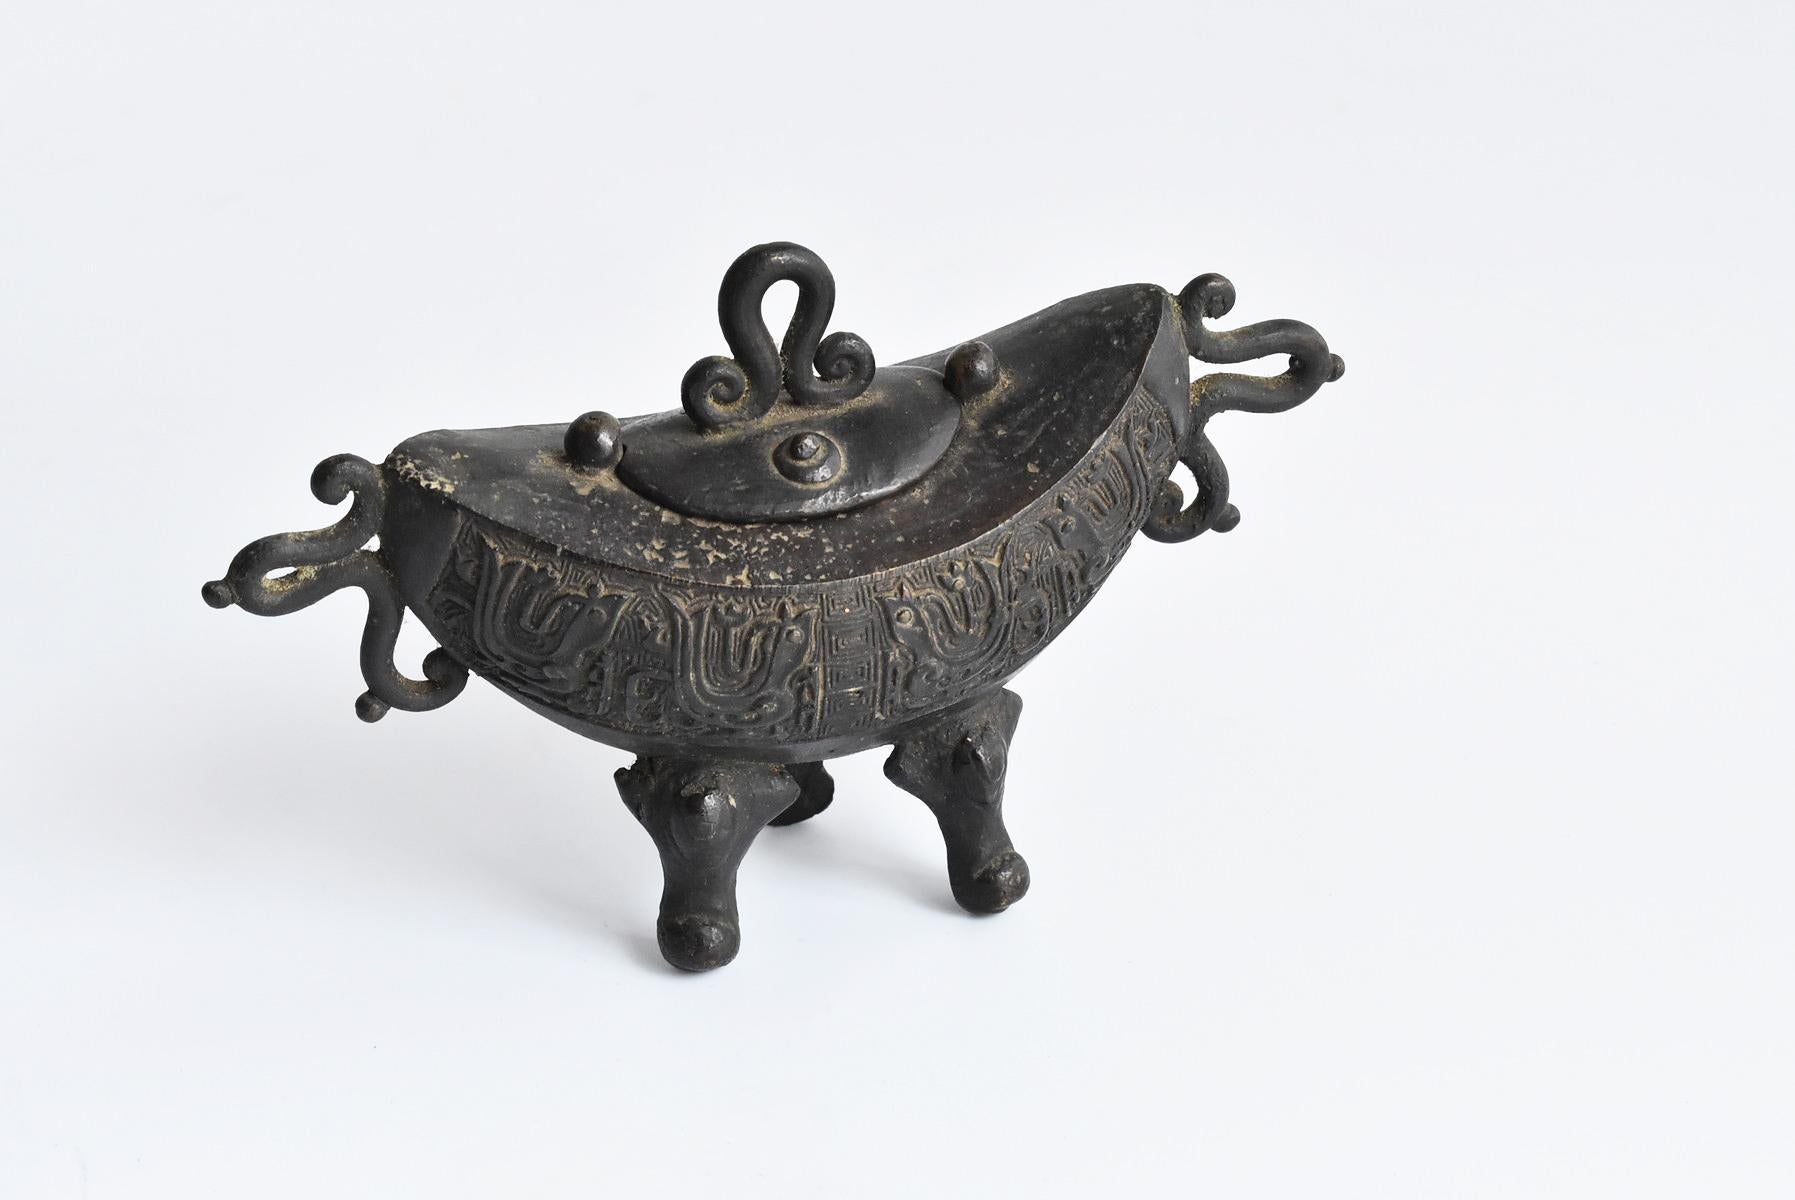 Chinese Old Brass Small Three-Legged Incense Burner 1700s-1800s / Small Incens 13